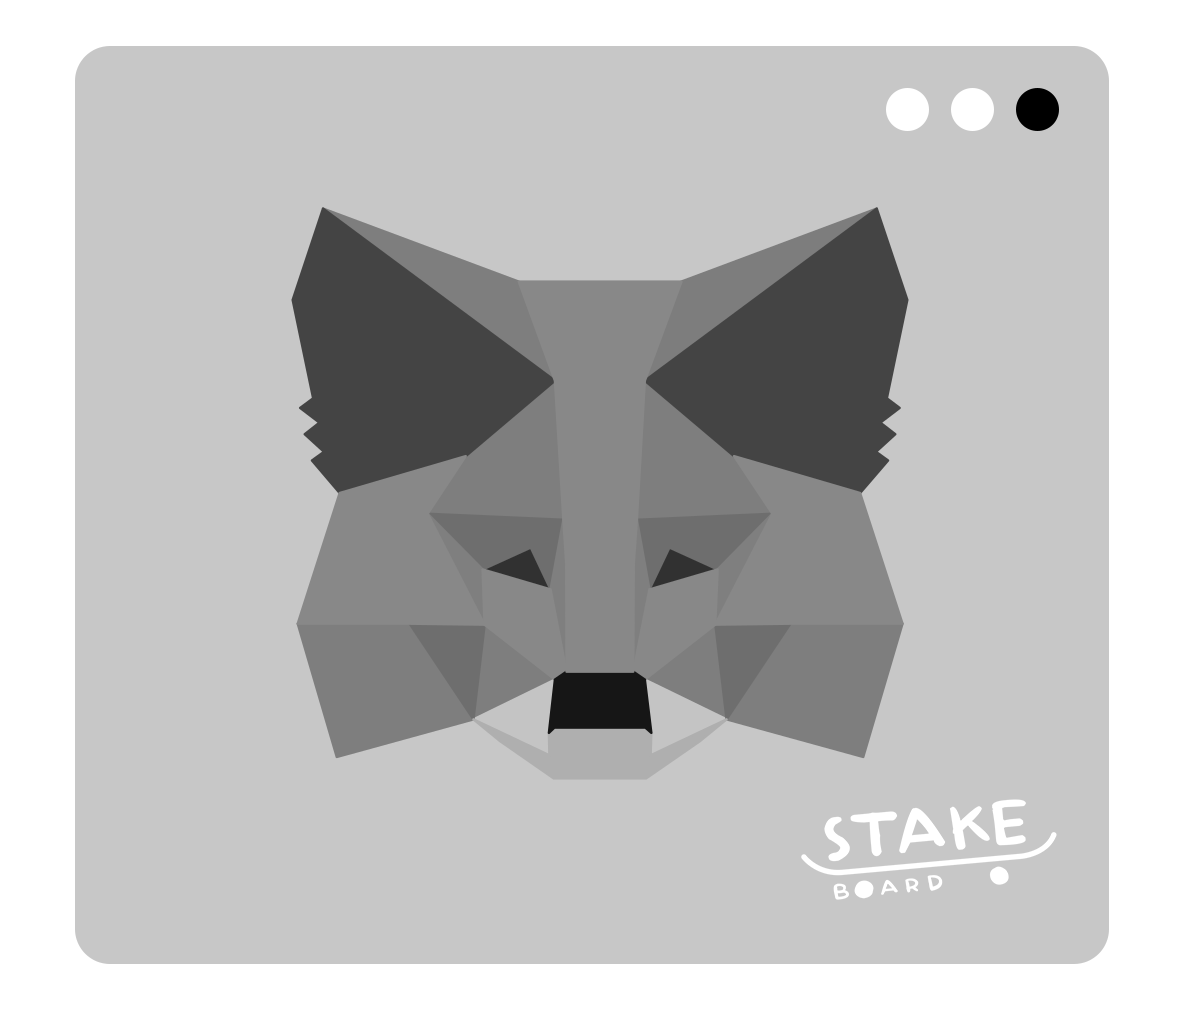 Staking ETH with MetaMask